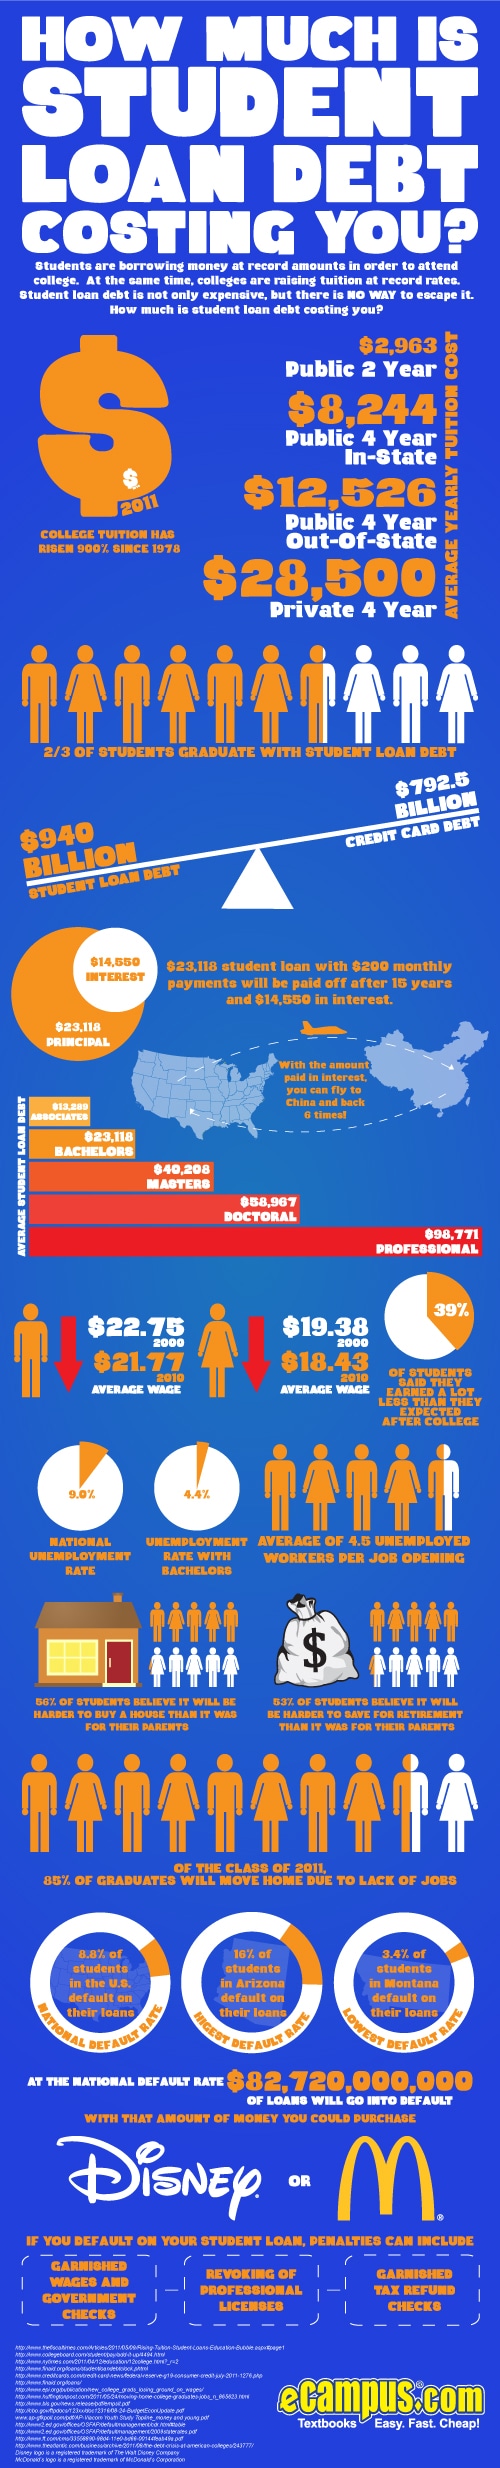 How Much is Student Loan Debt Costing You? (infographic)